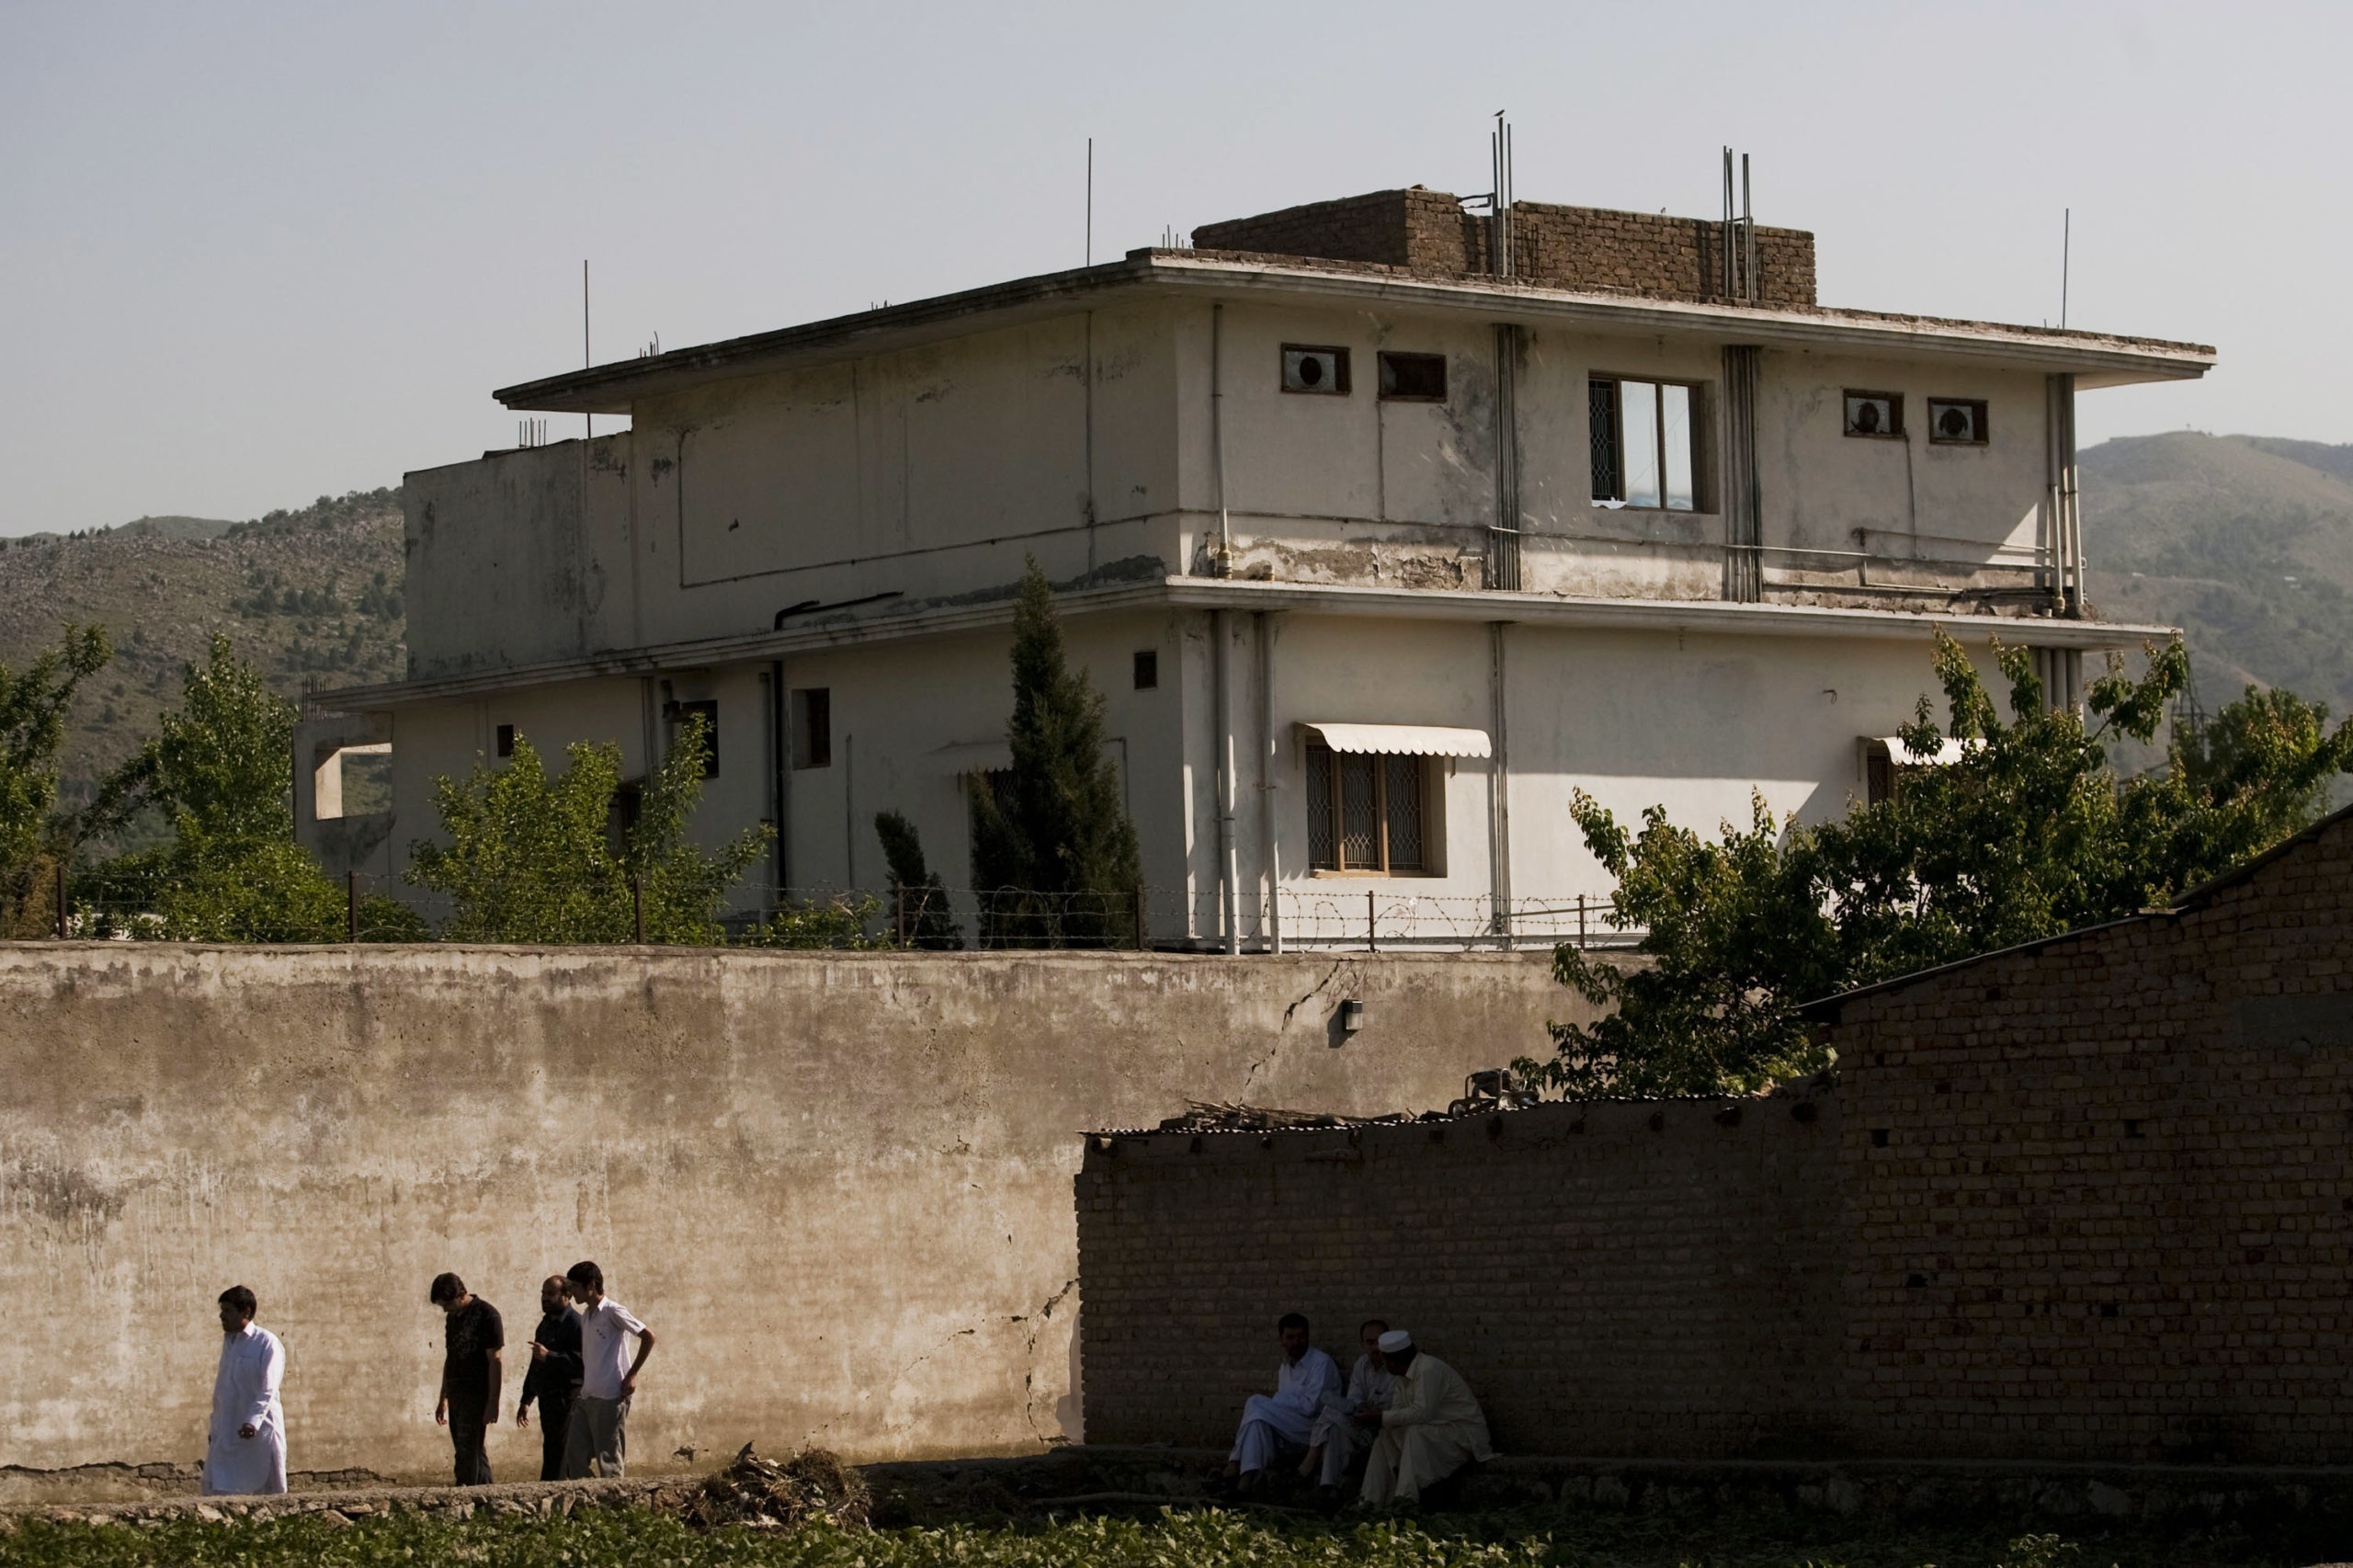 ABBOTTABAD, PAKISTAN - MAY 3: People walk past Osama Bin Laden's compound, where he was killed during a raid by U.S. special forces, May 3, 2011 in Abottabad, Pakistan. Bin Laden was killed during a U.S. military mission May 2, at the compound. According to reports May 4, 2011, the Obama administration has decided not to release photographs of Bin Laden's body. (Photo by Getty Images)